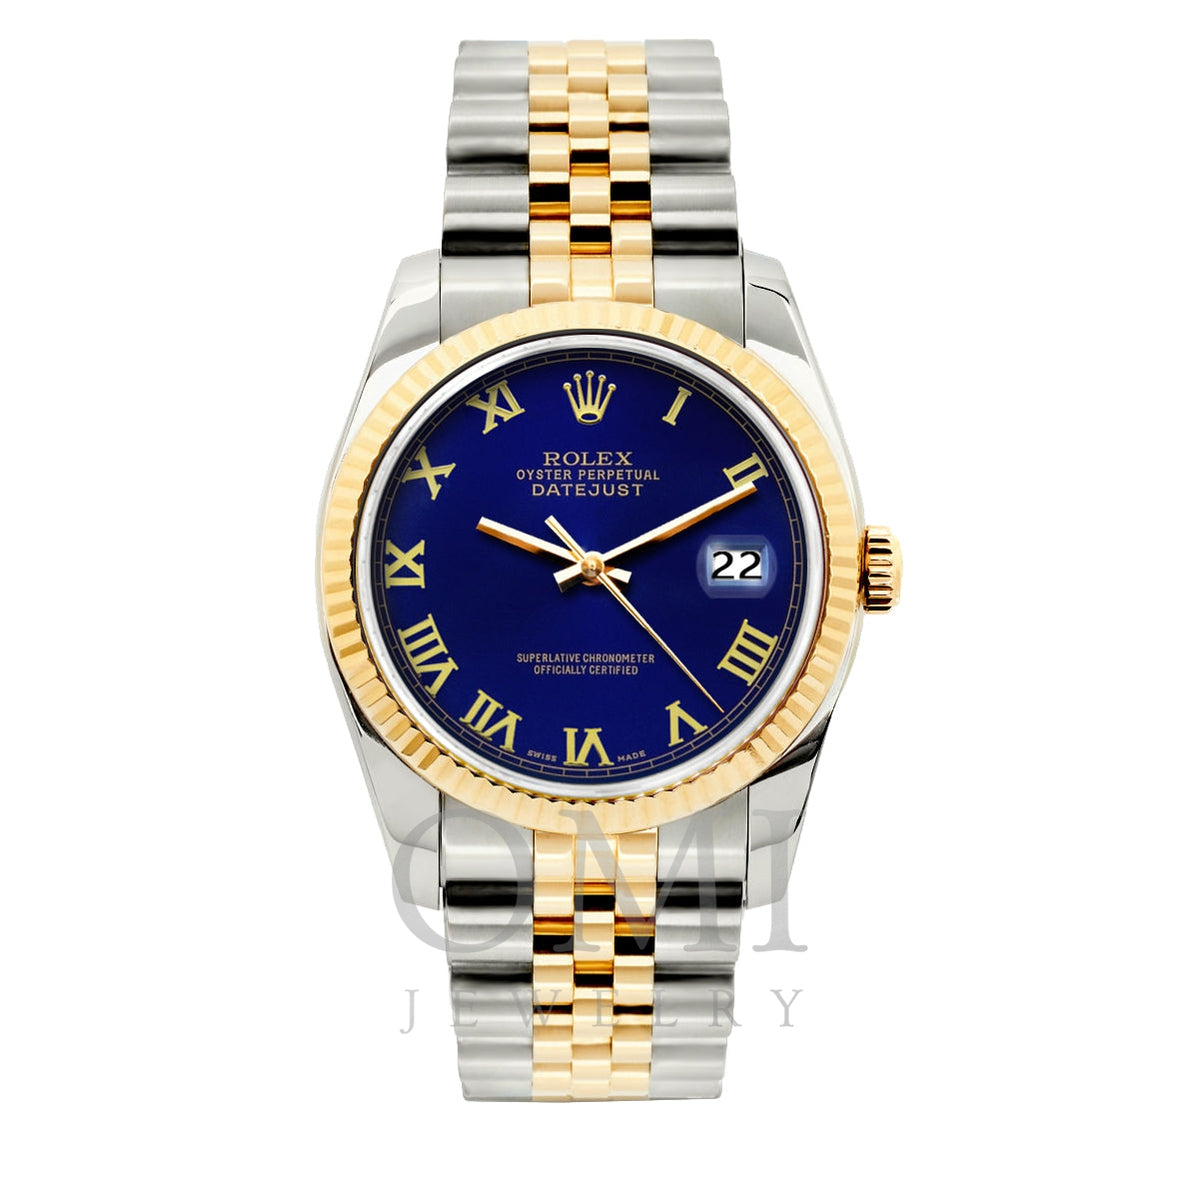 Rolex Datejust 36mm Yellow Gold and Stainless Steel Bracelet Royal Blu OMI